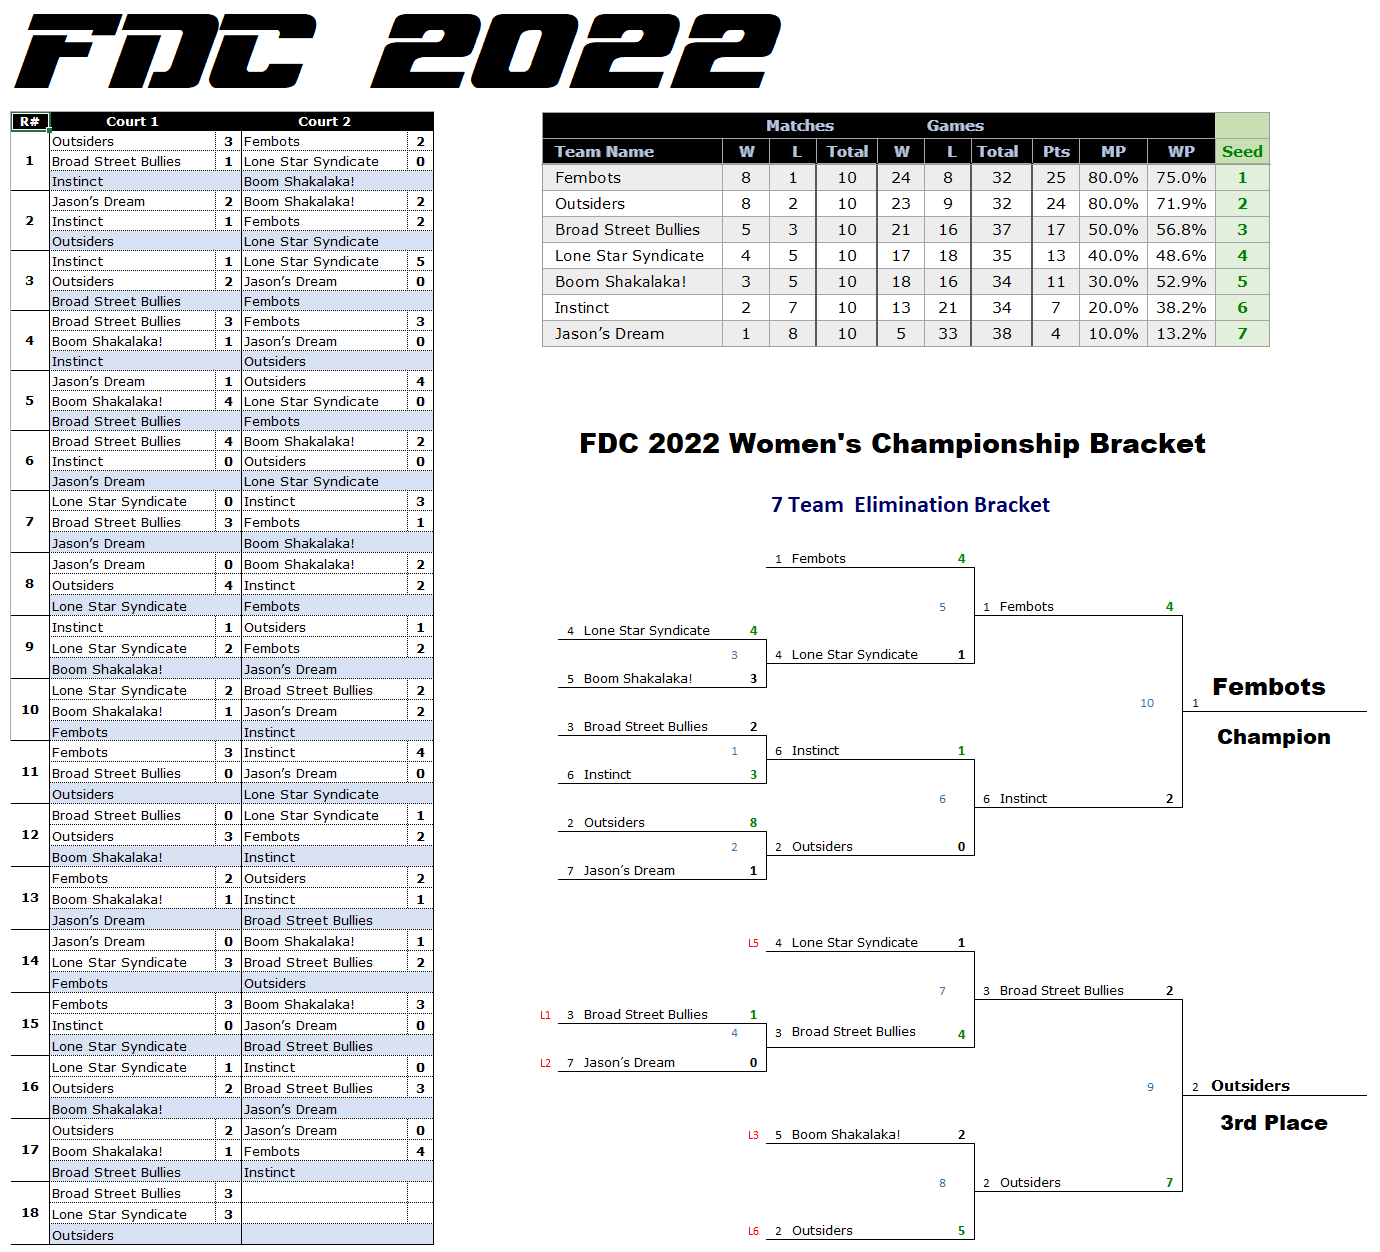 FDC 2022 Women's Division Results